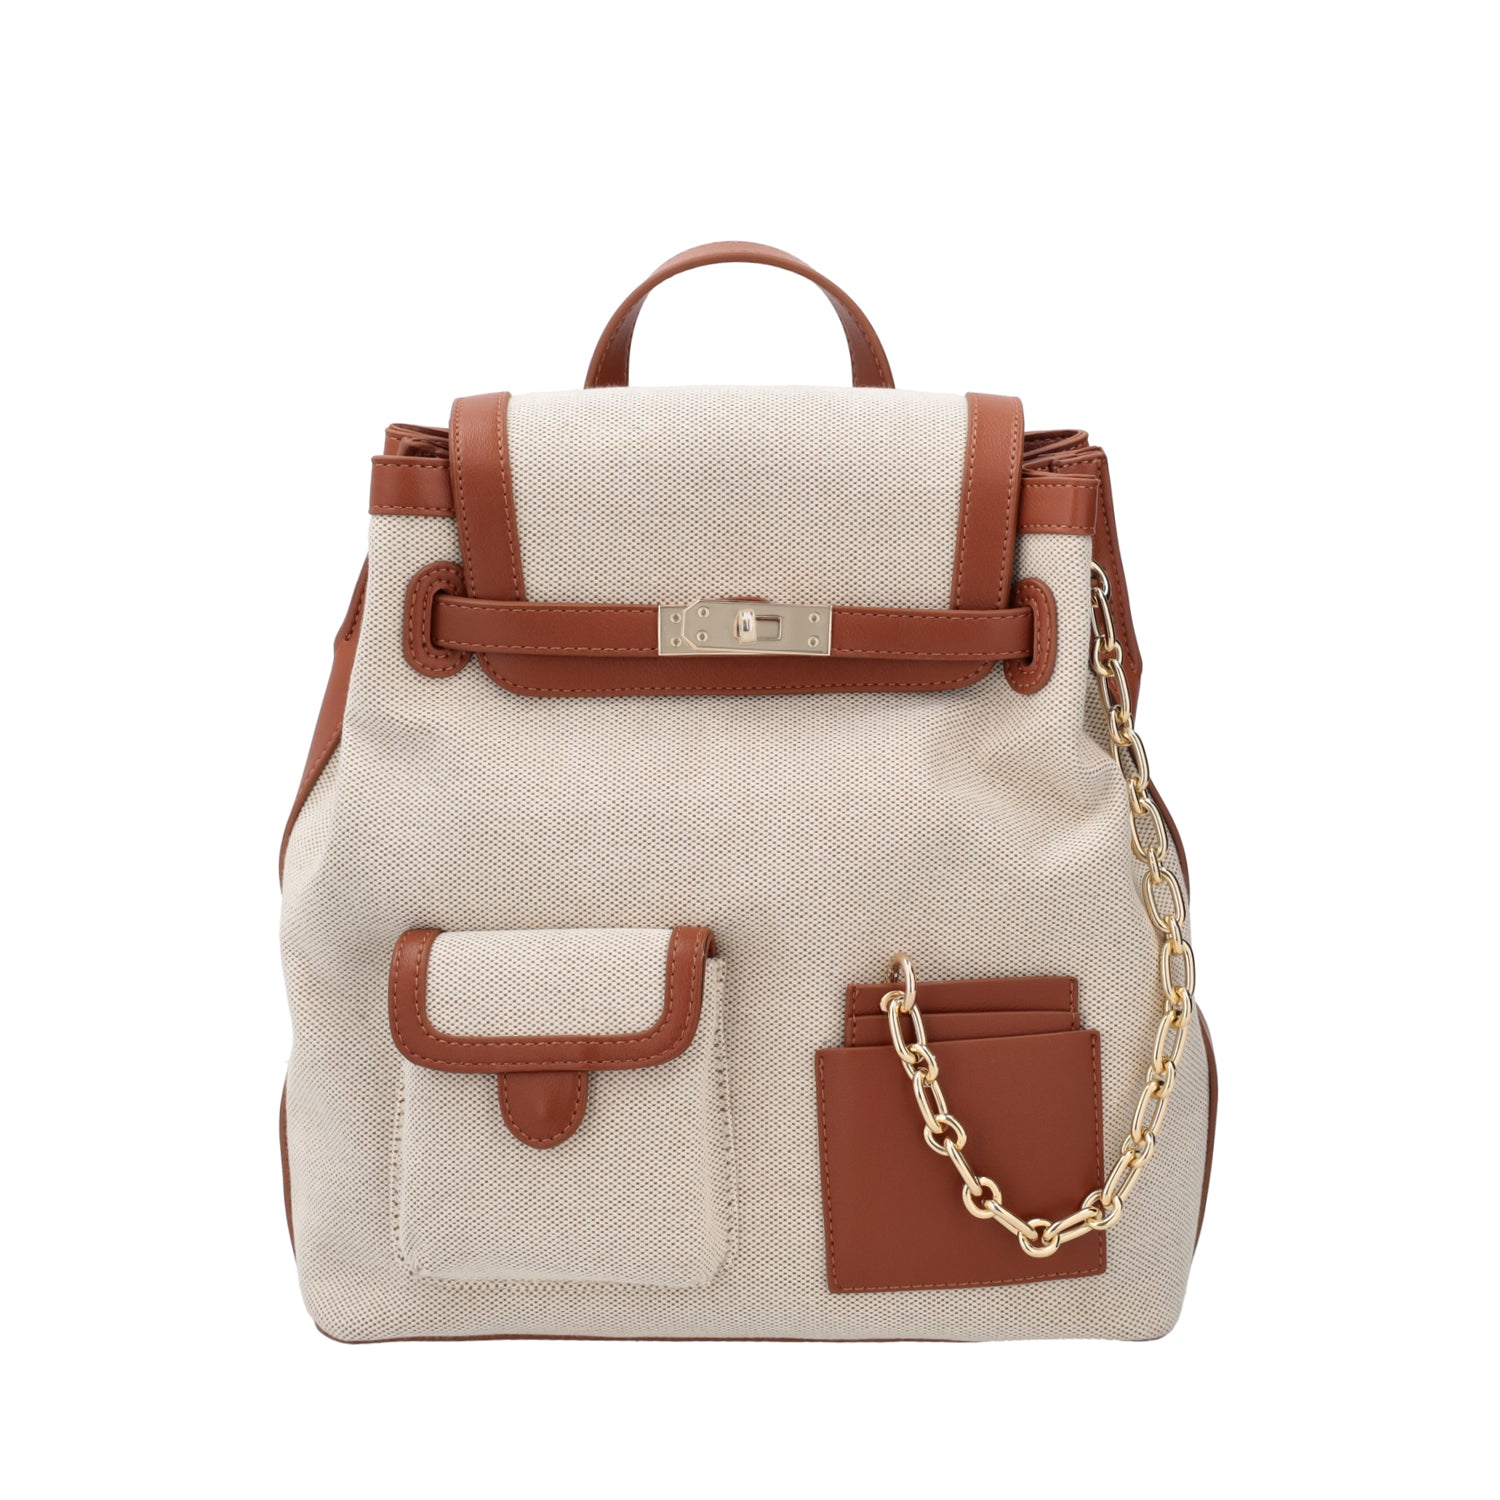 TAN FIORDALISO BACKPACK WITH CONTRAST PROFILES